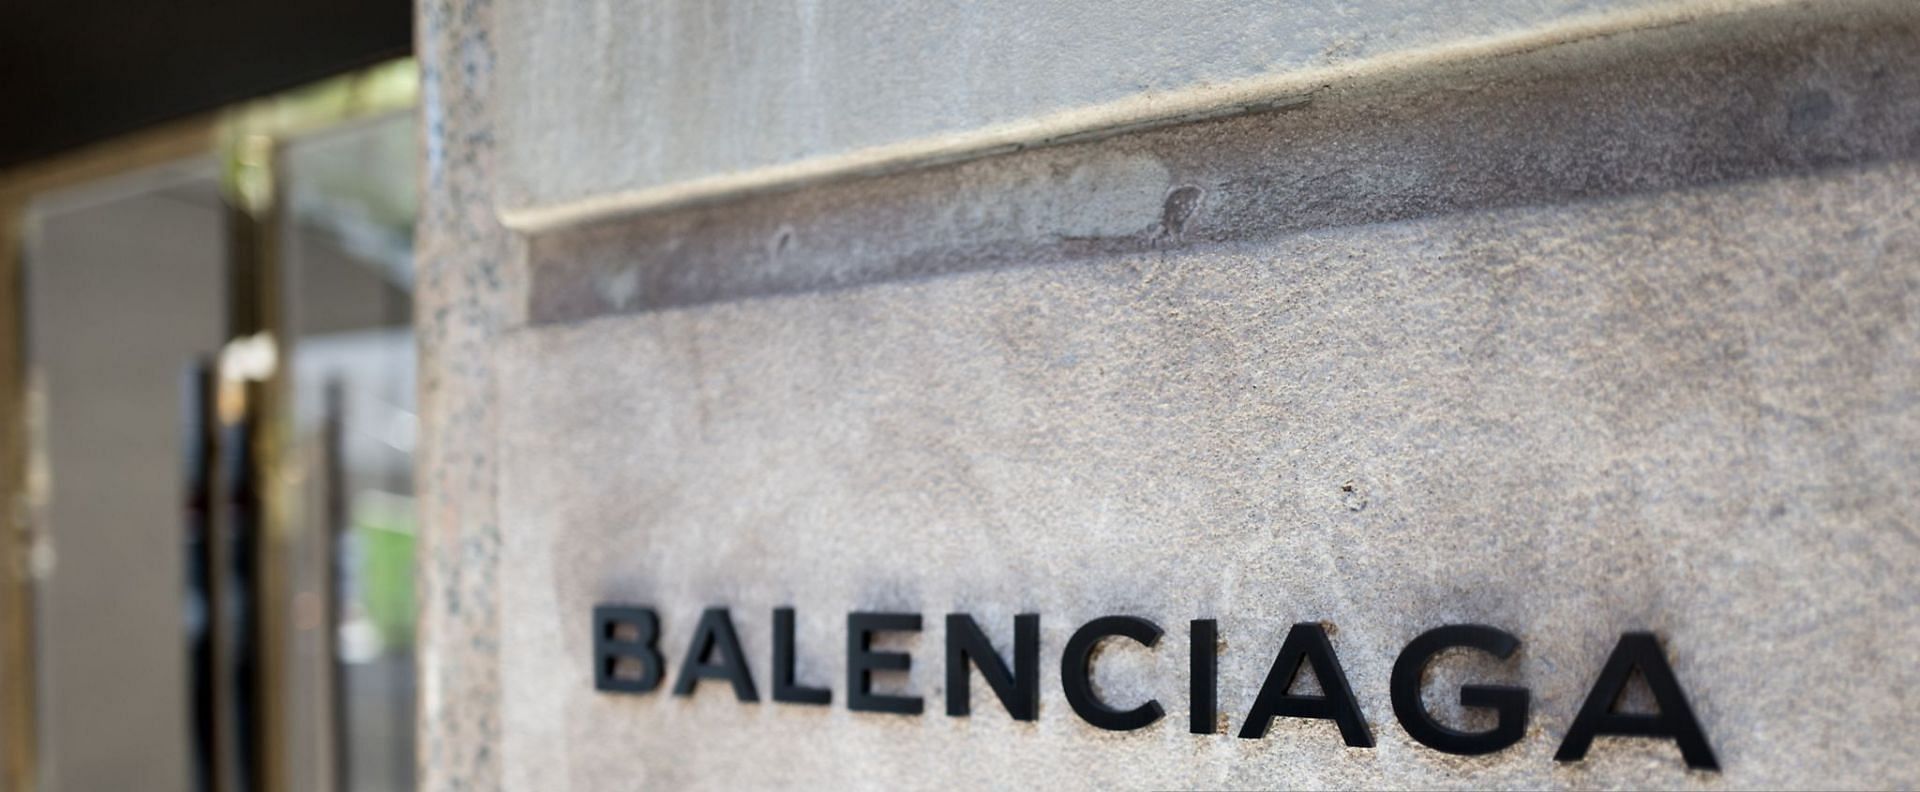 Balenciaga is facing intense online scrutiny following controversial child ad campaign (Image via Getty Images)